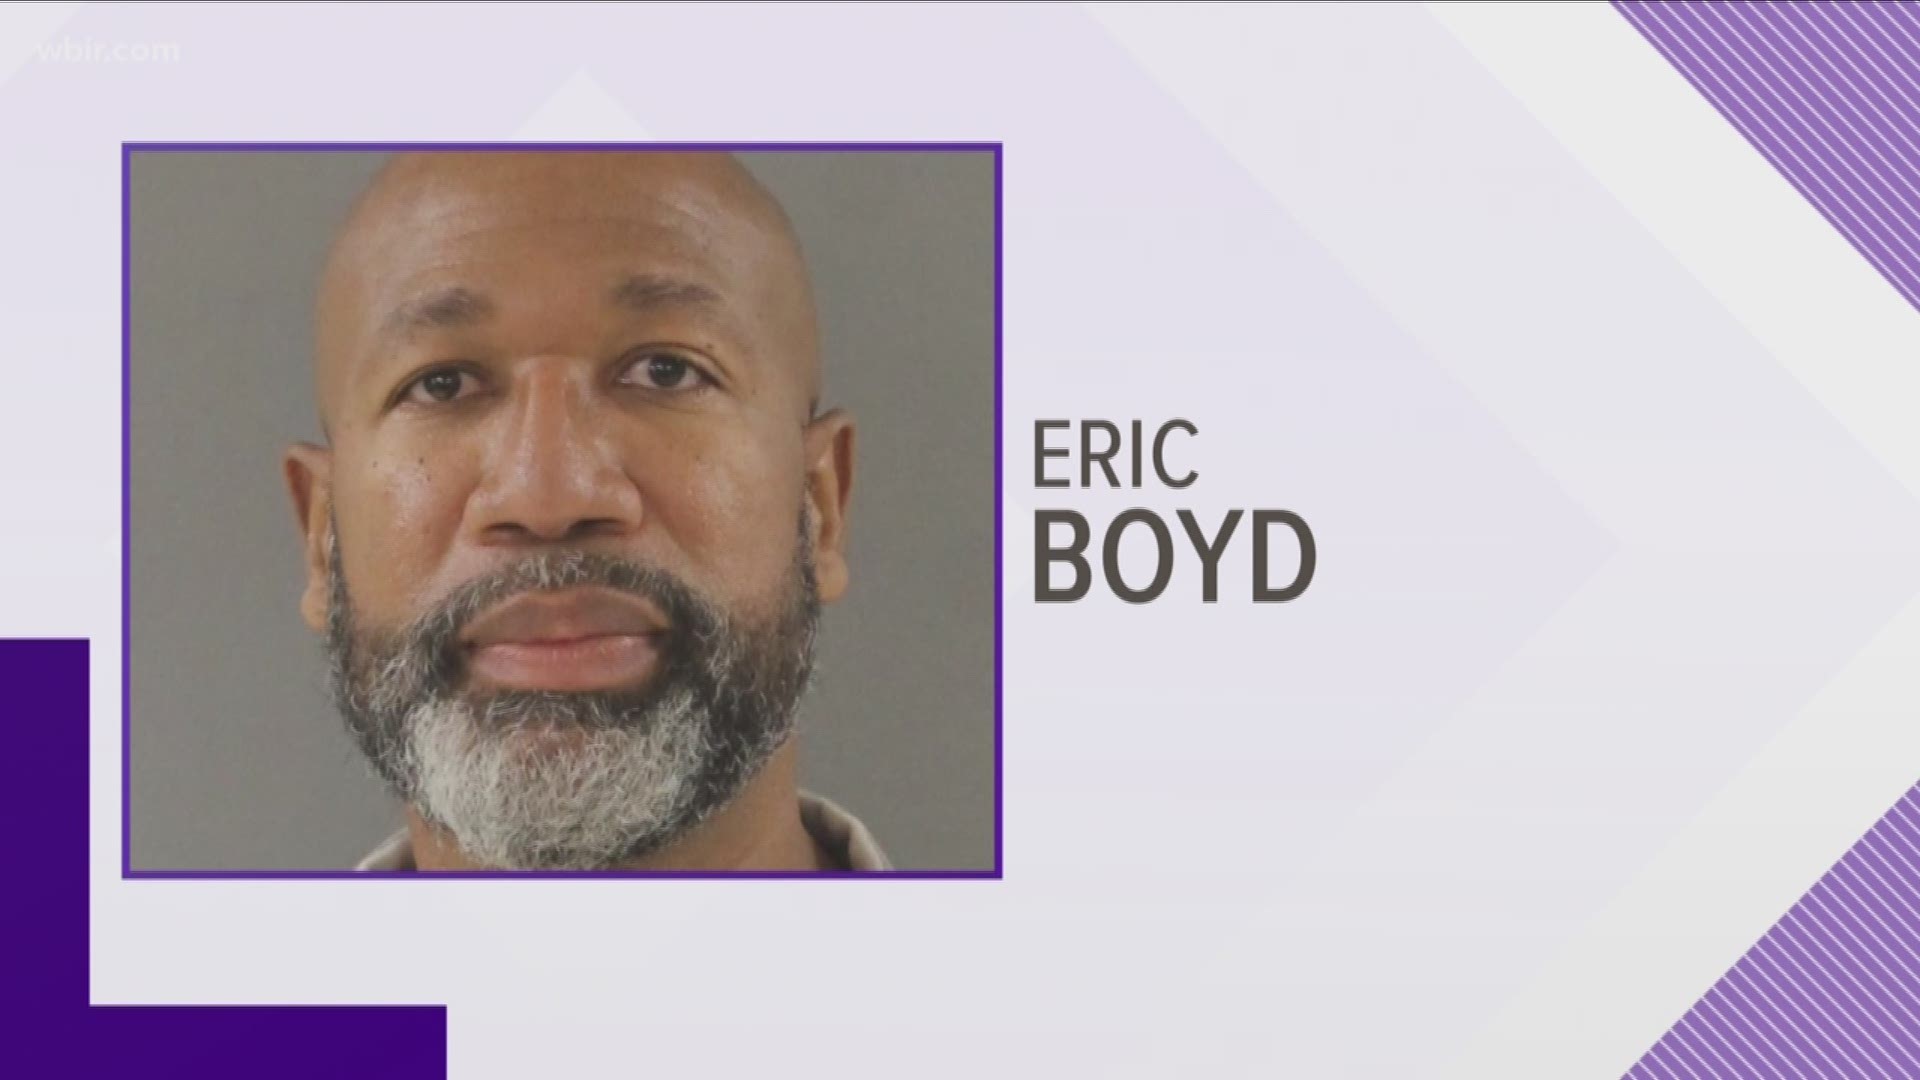 Eric Boyd is scheduled to be in court Thursday ahead of his August trial.